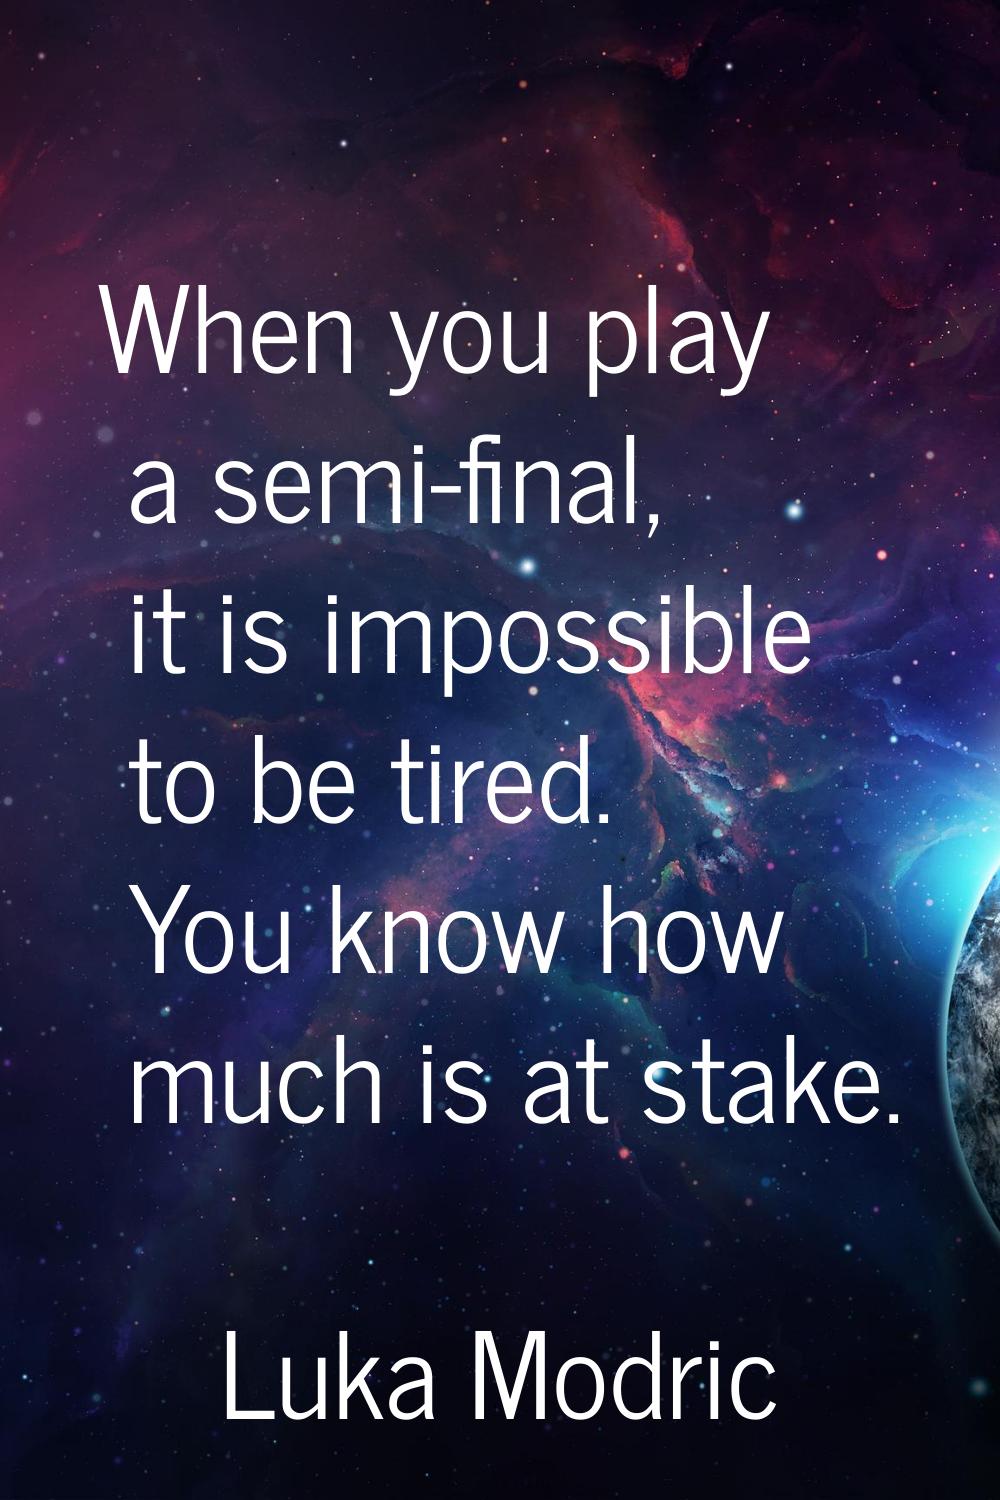 When you play a semi-final, it is impossible to be tired. You know how much is at stake.